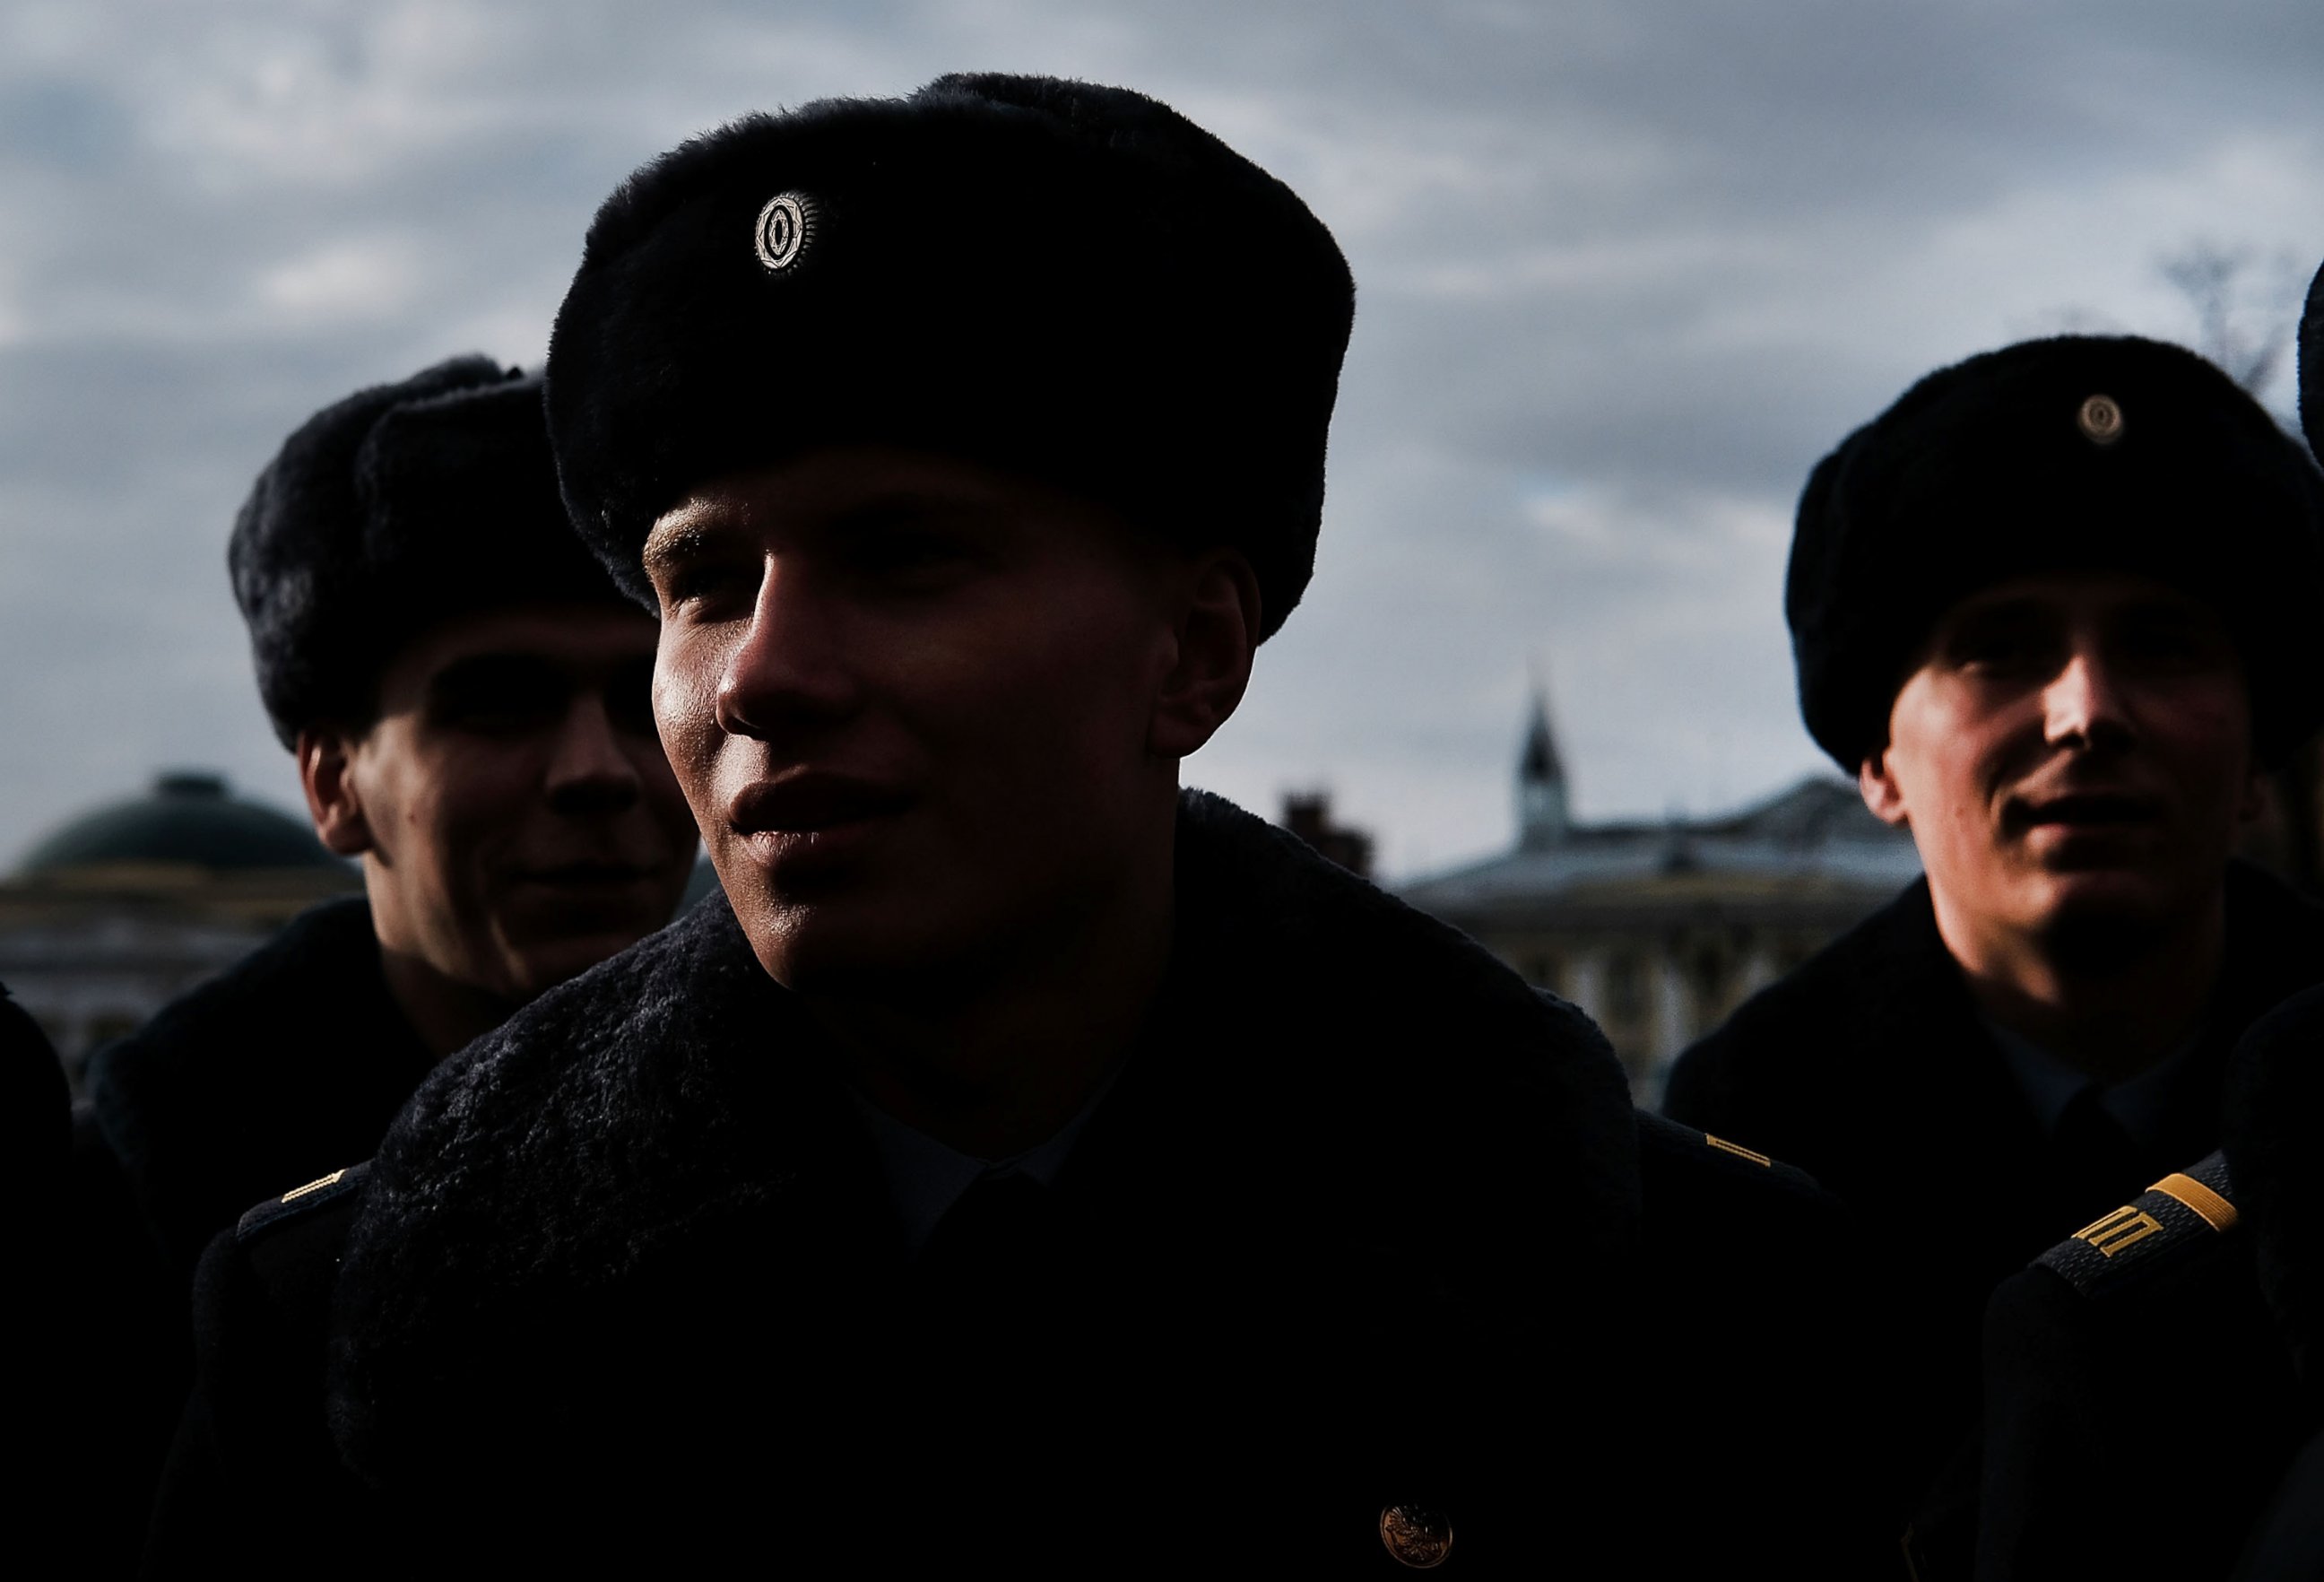 PHOTO: Members of the Presidential Regiment stand outside of the Tomb of the Unknown Soldier on March 4, 2017 in Moscow.